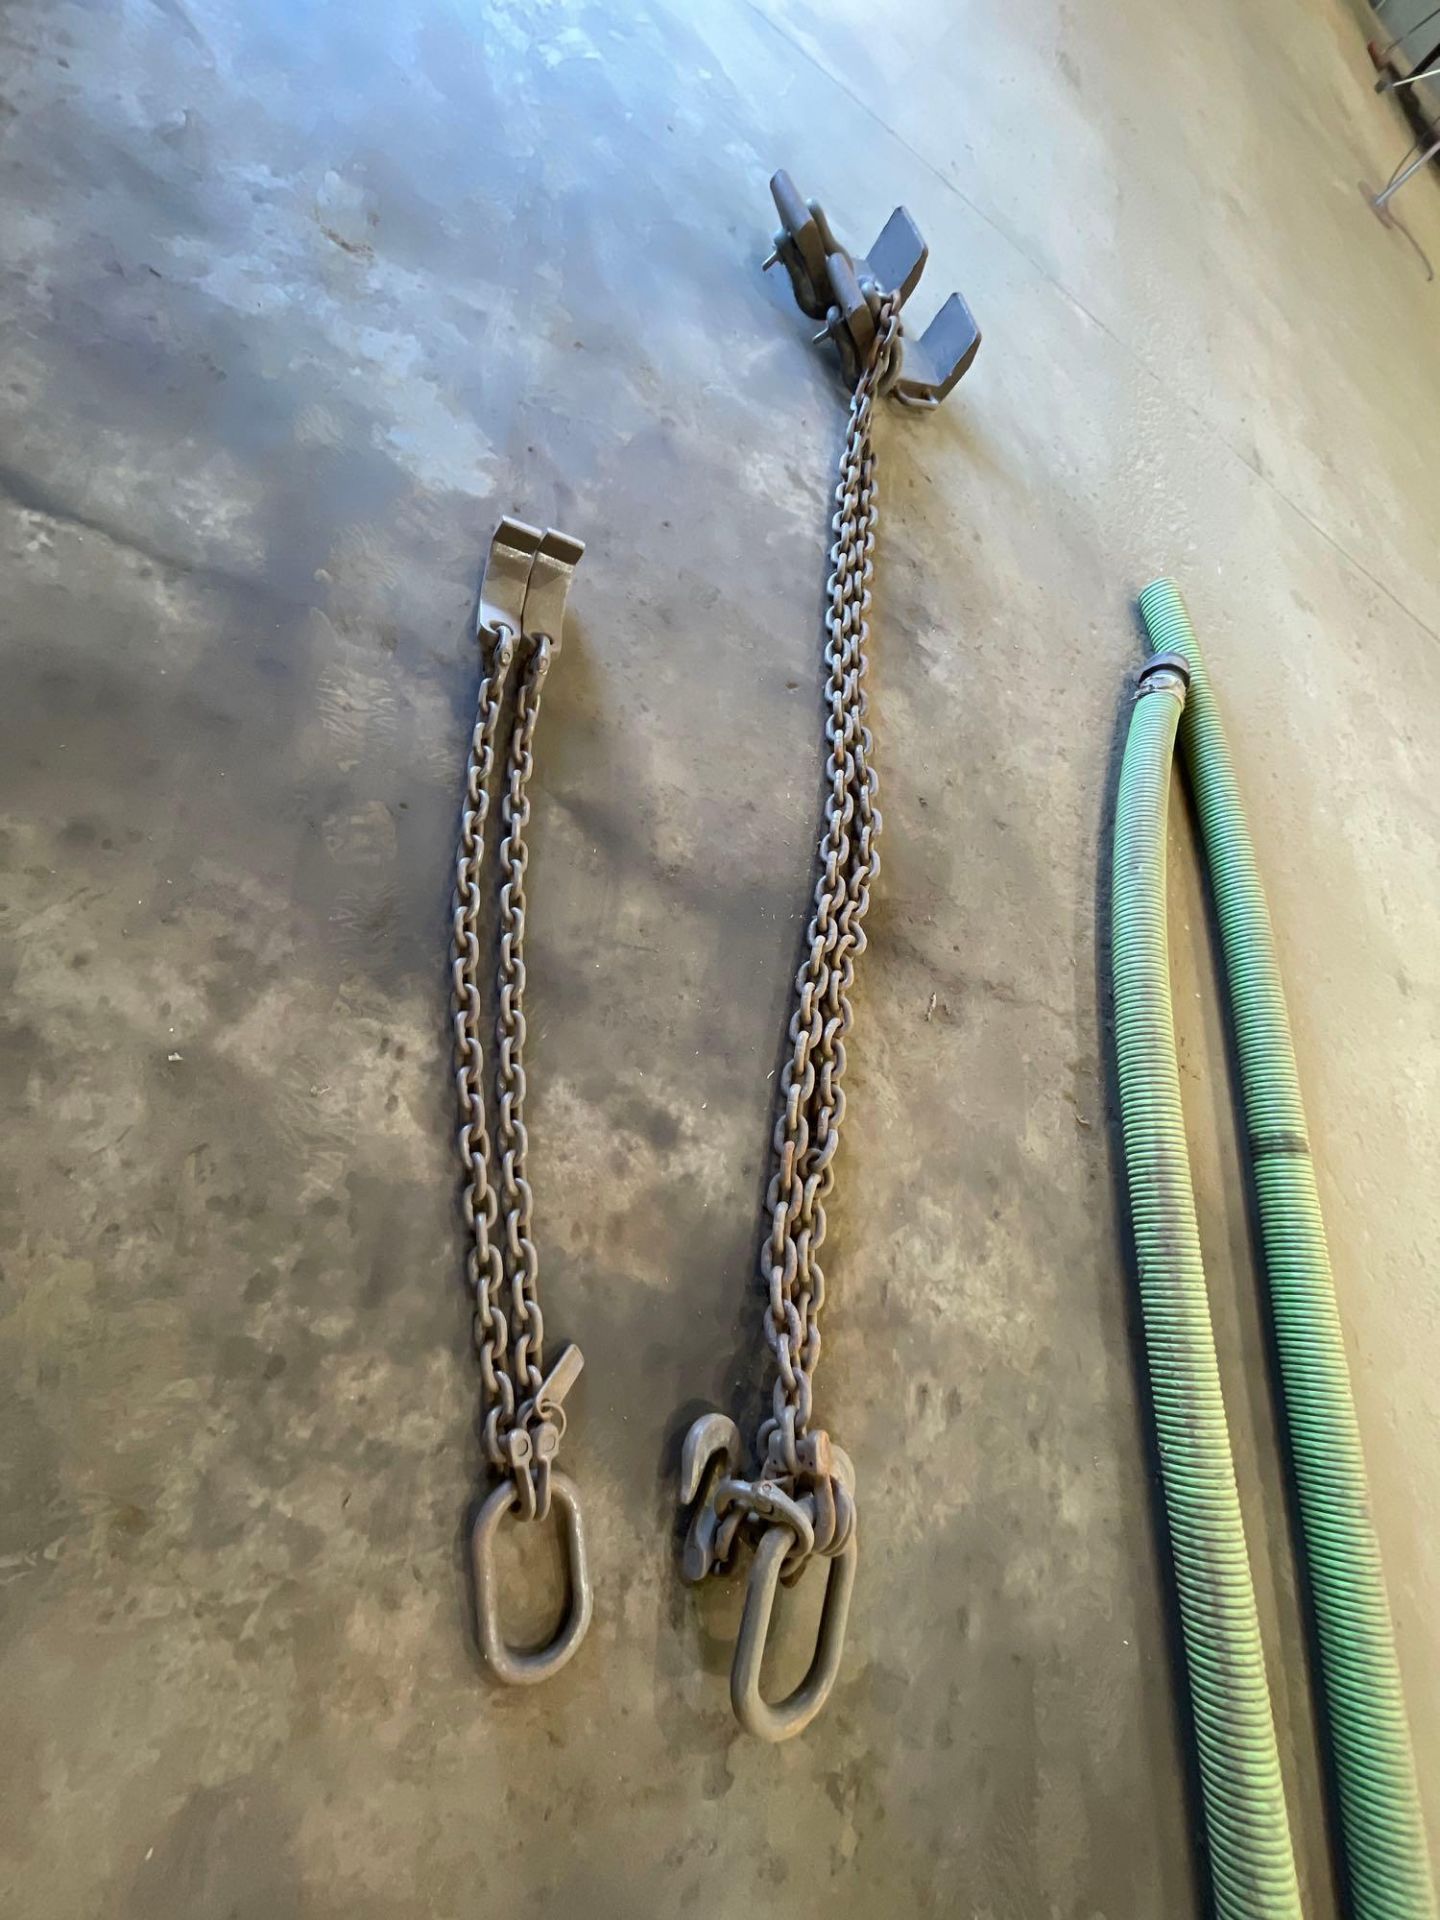 Lot of 2 Chains with Hooks: (1) 8' Long with 2 Hooks, (1) 41” Long with 2 Hooks - Image 4 of 6